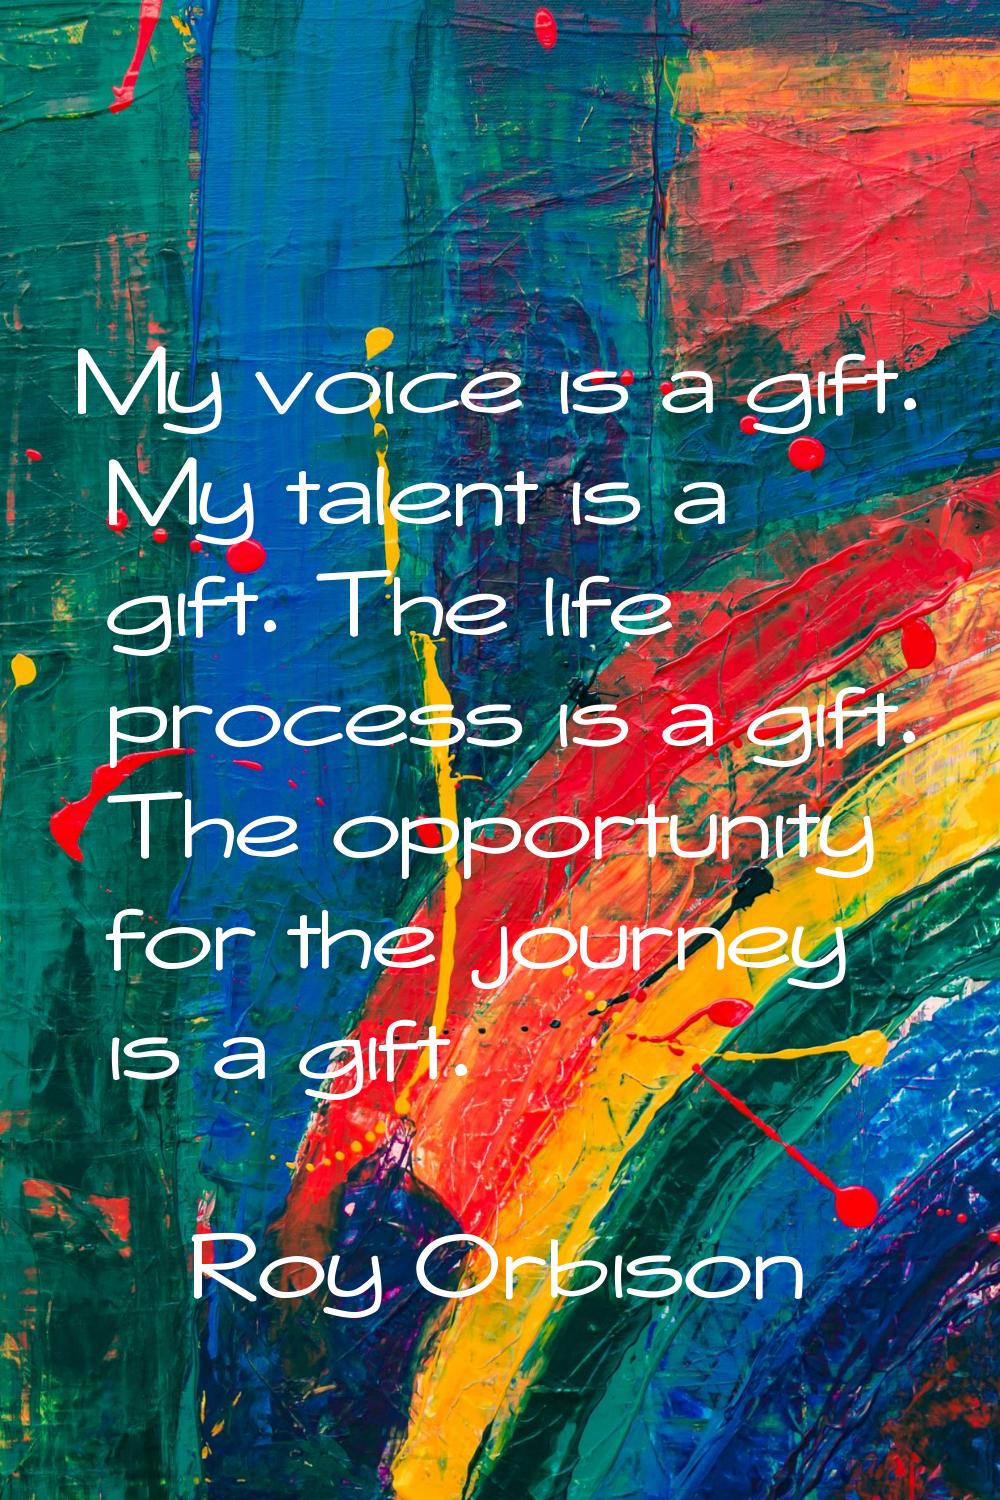 My voice is a gift. My talent is a gift. The life process is a gift. The opportunity for the journe